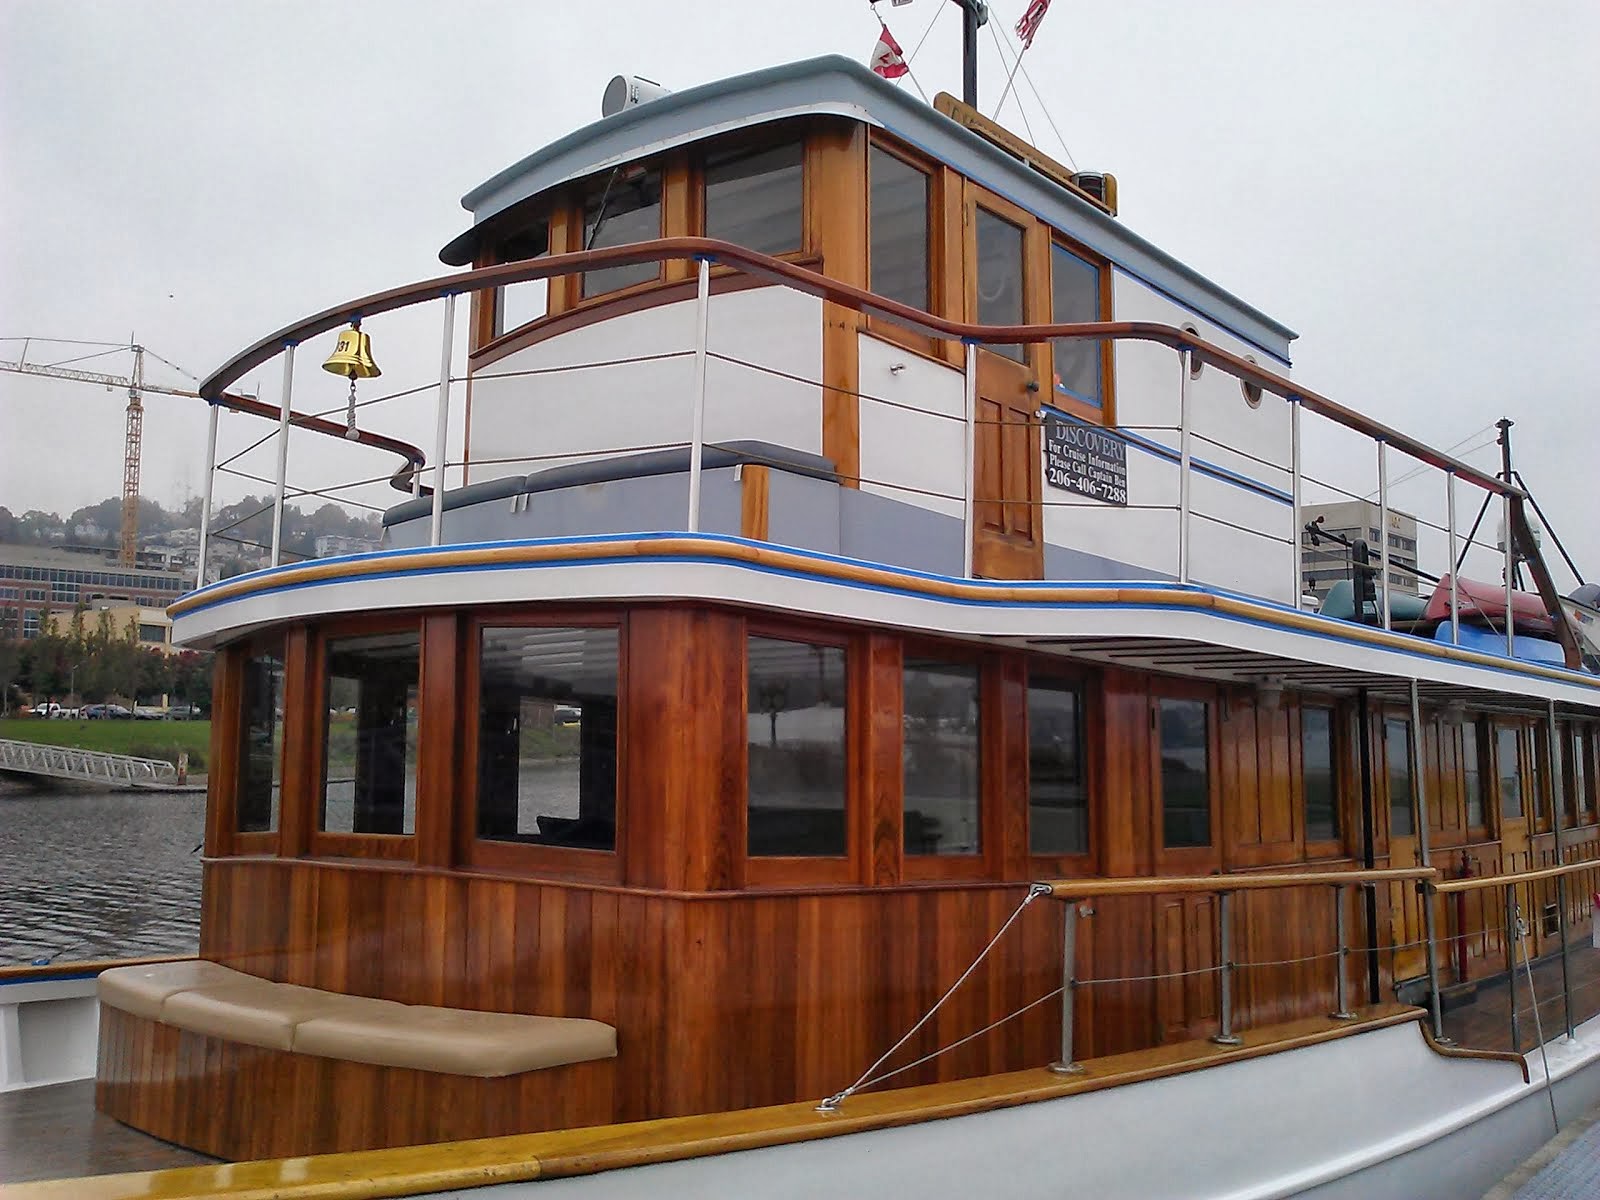 M/V Discovery Wheelhouse moved up and saloon built below